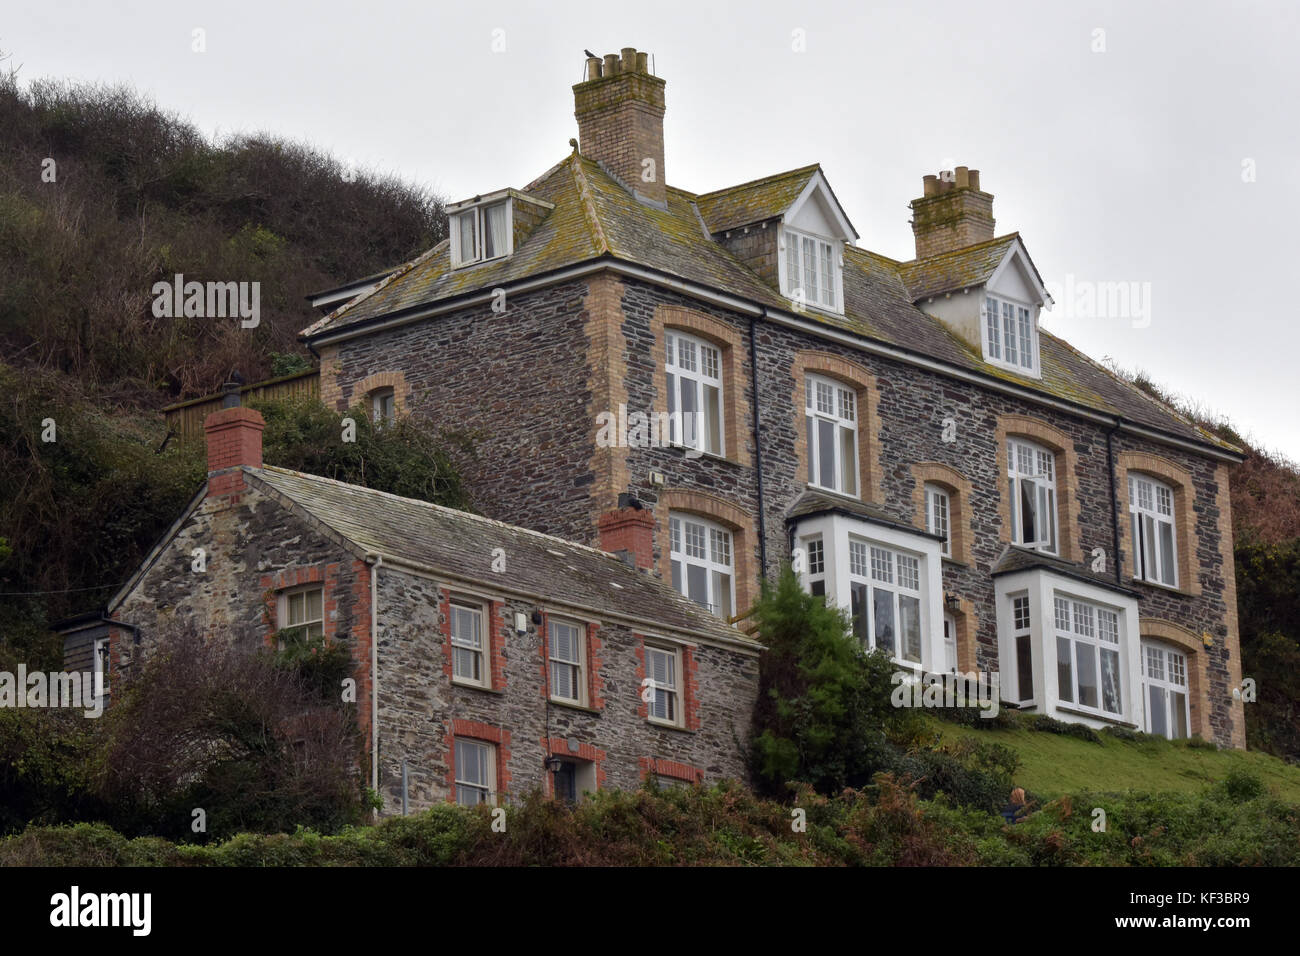 Some Stone Built Cornish Cottages And Houses On A Hill Near The